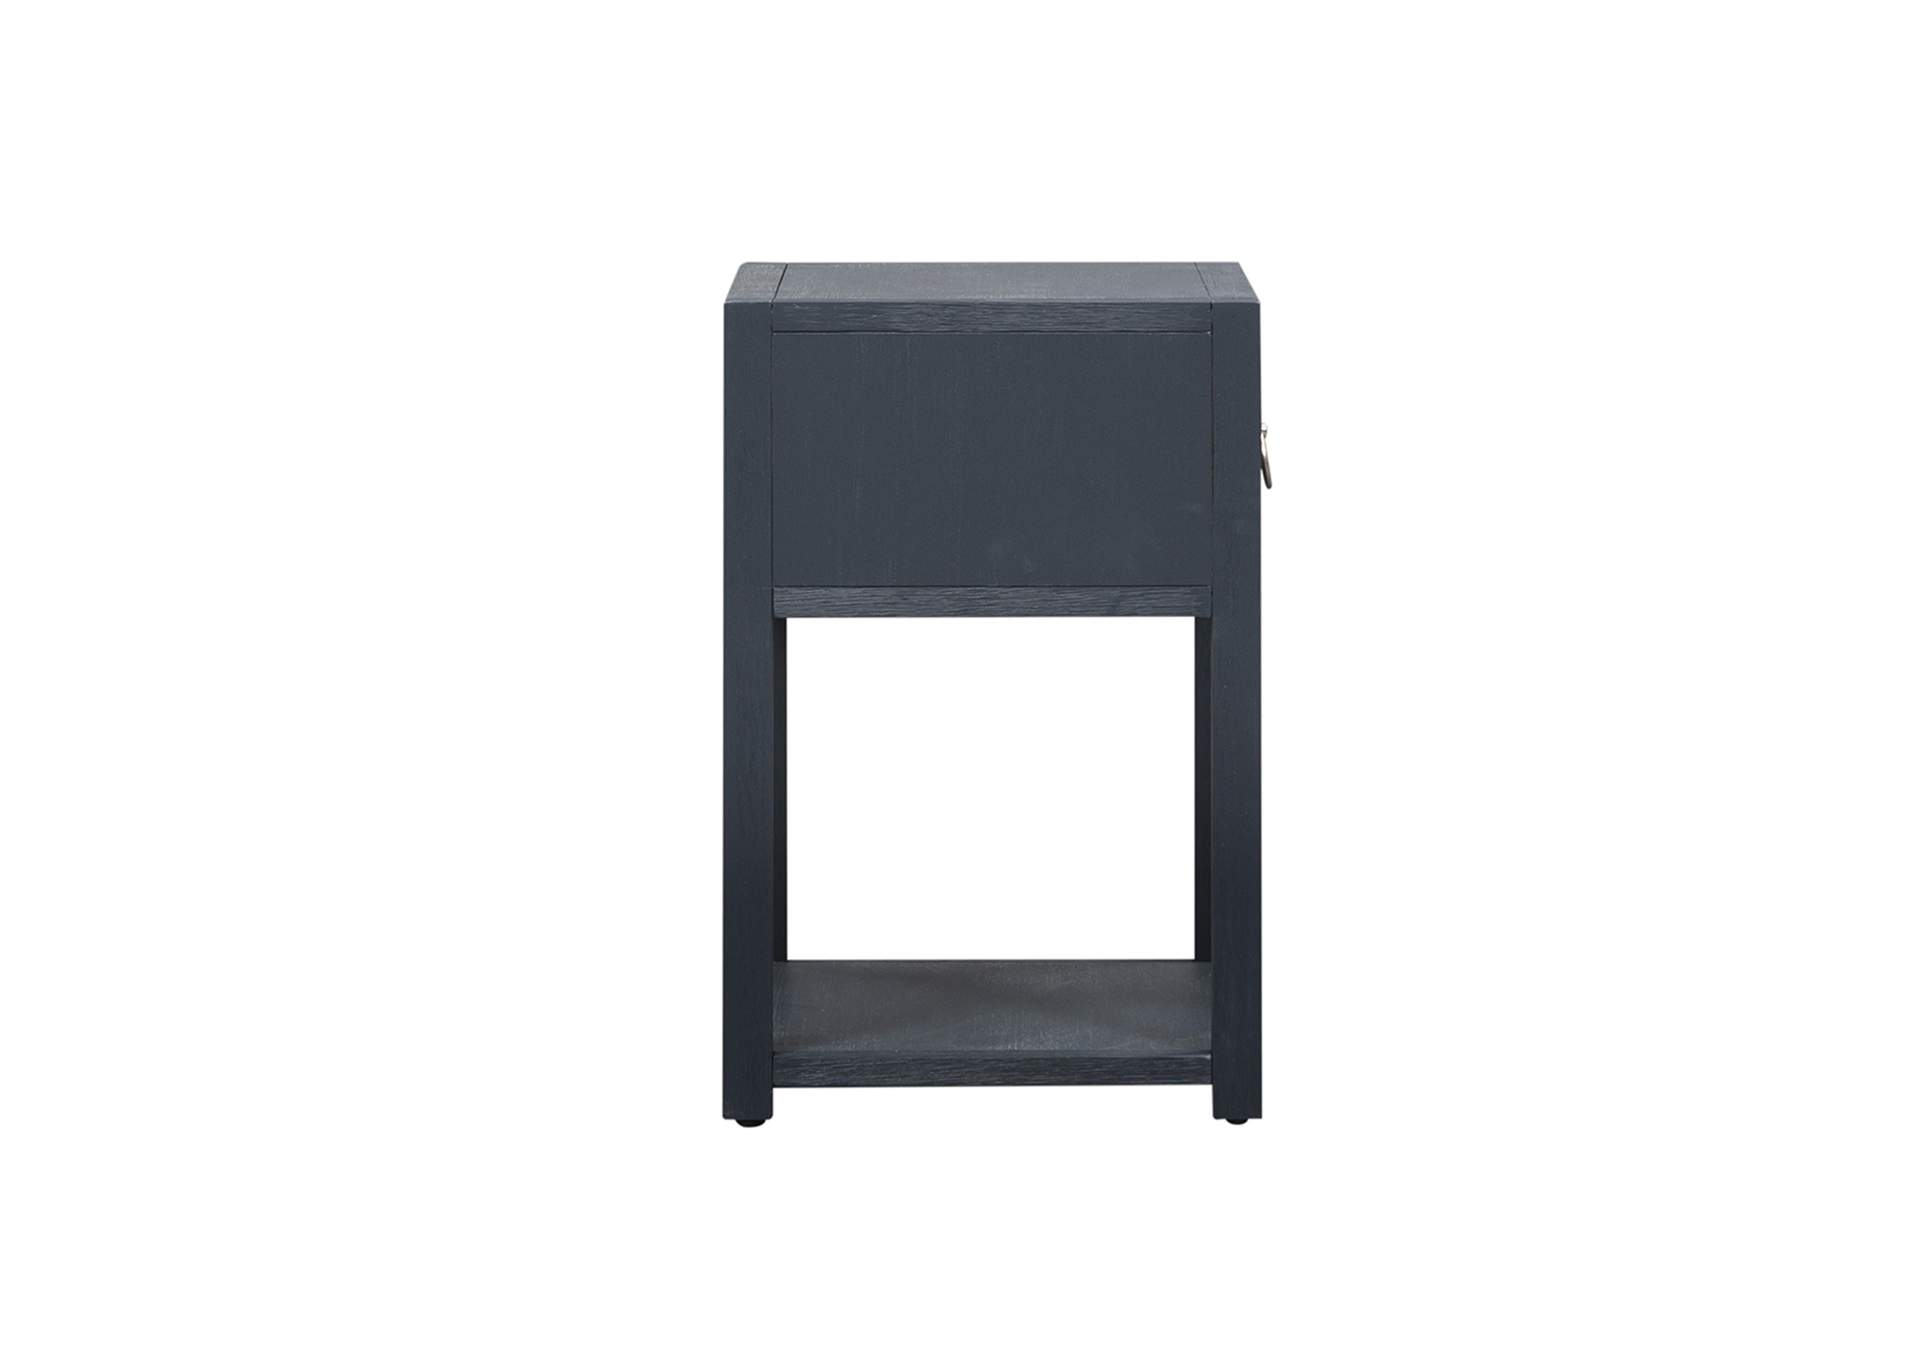 East End 1 Shelf Accent Table,Liberty